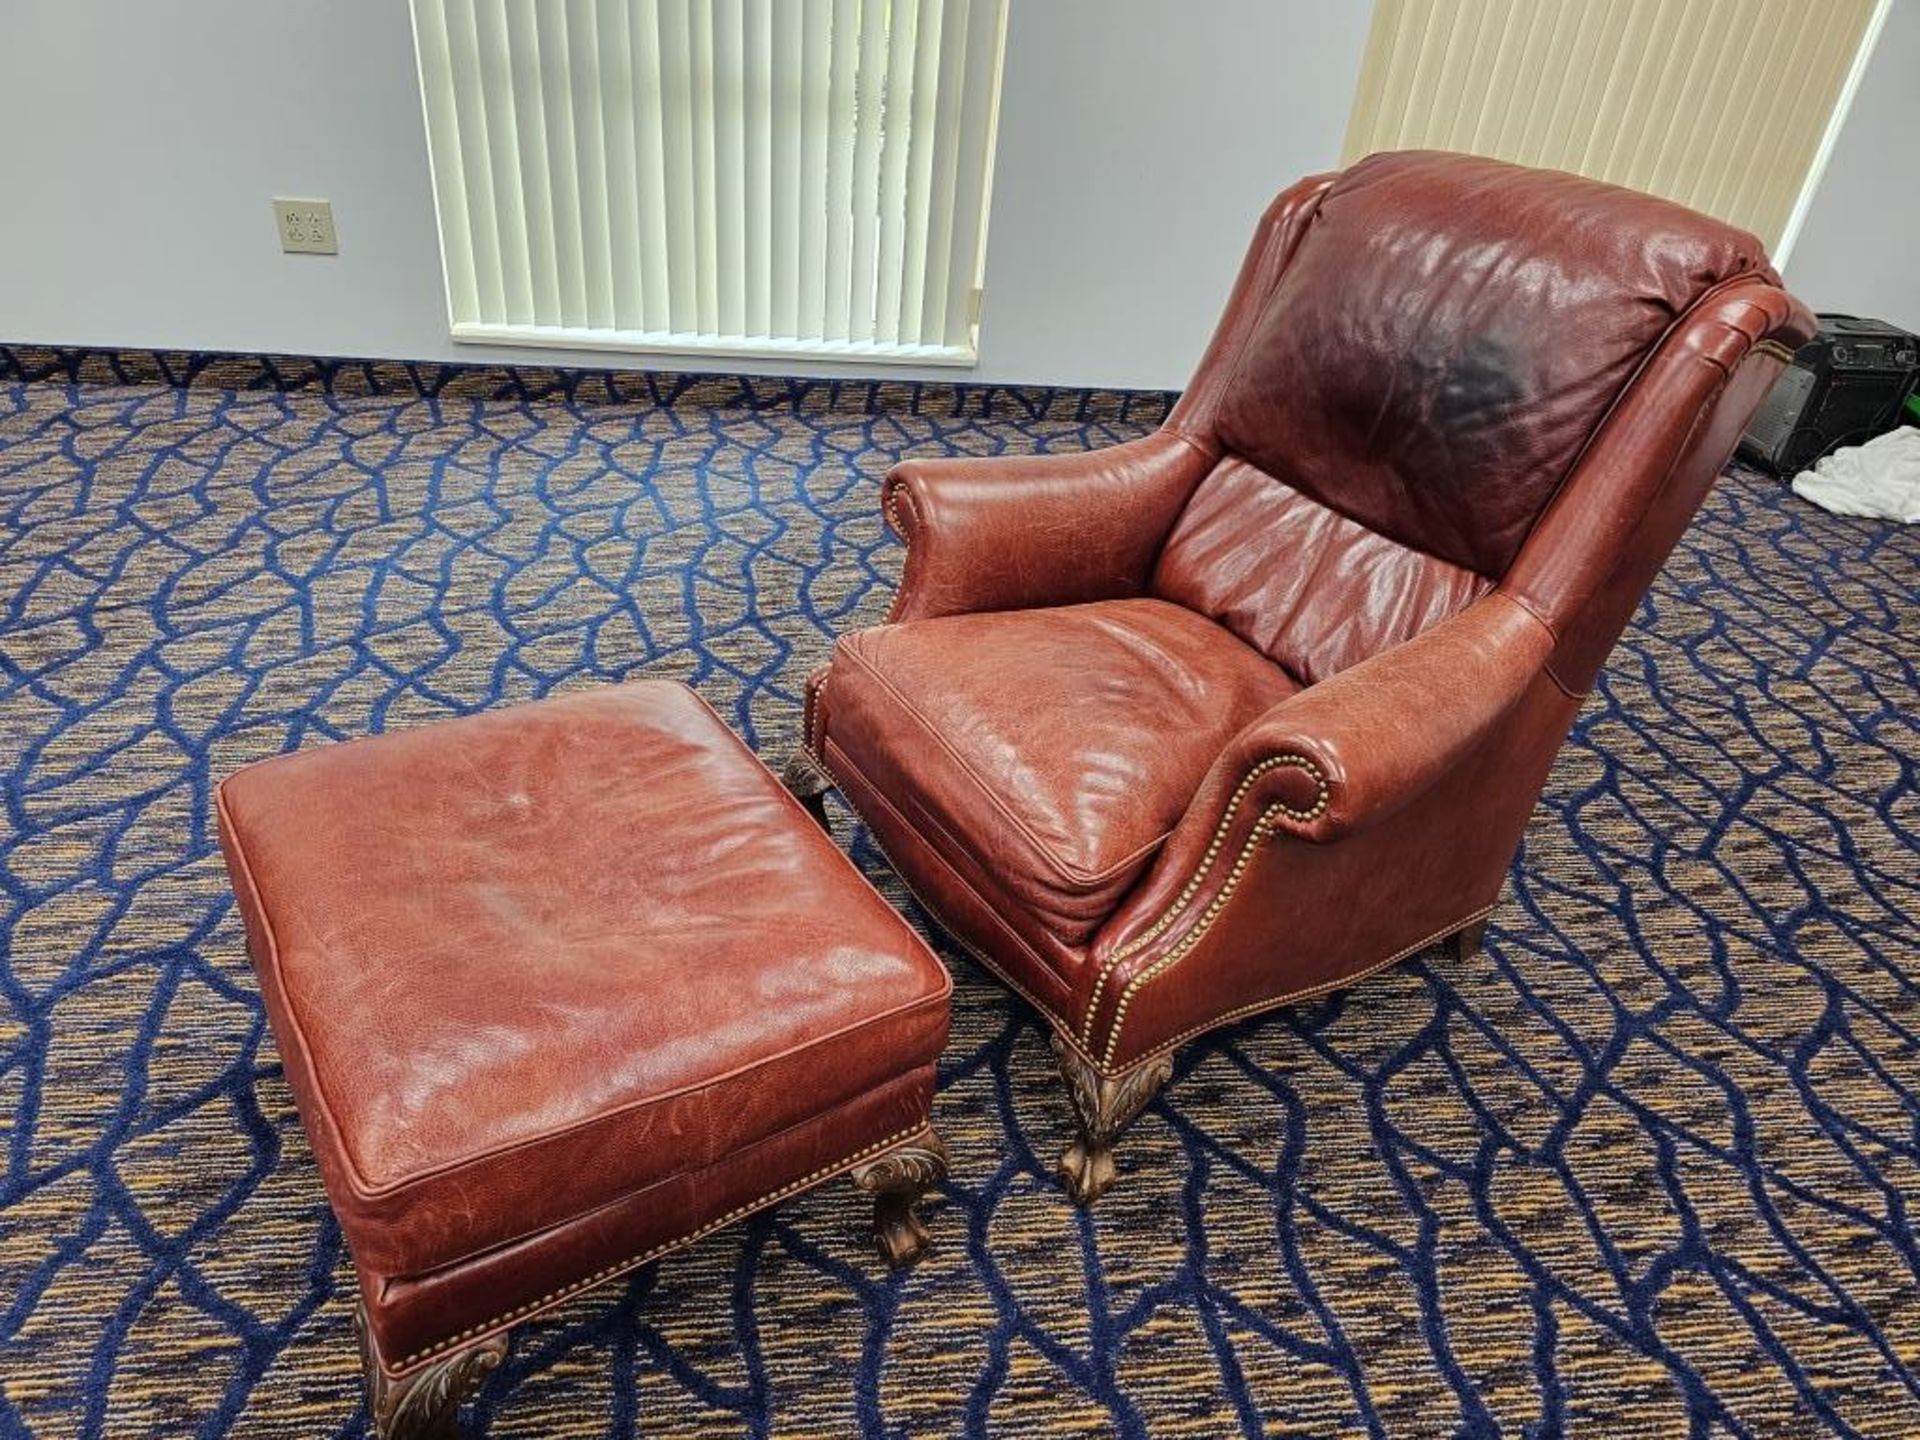 (2) Robb & Stucky Leather Chairs With Foot Stools - Image 11 of 11